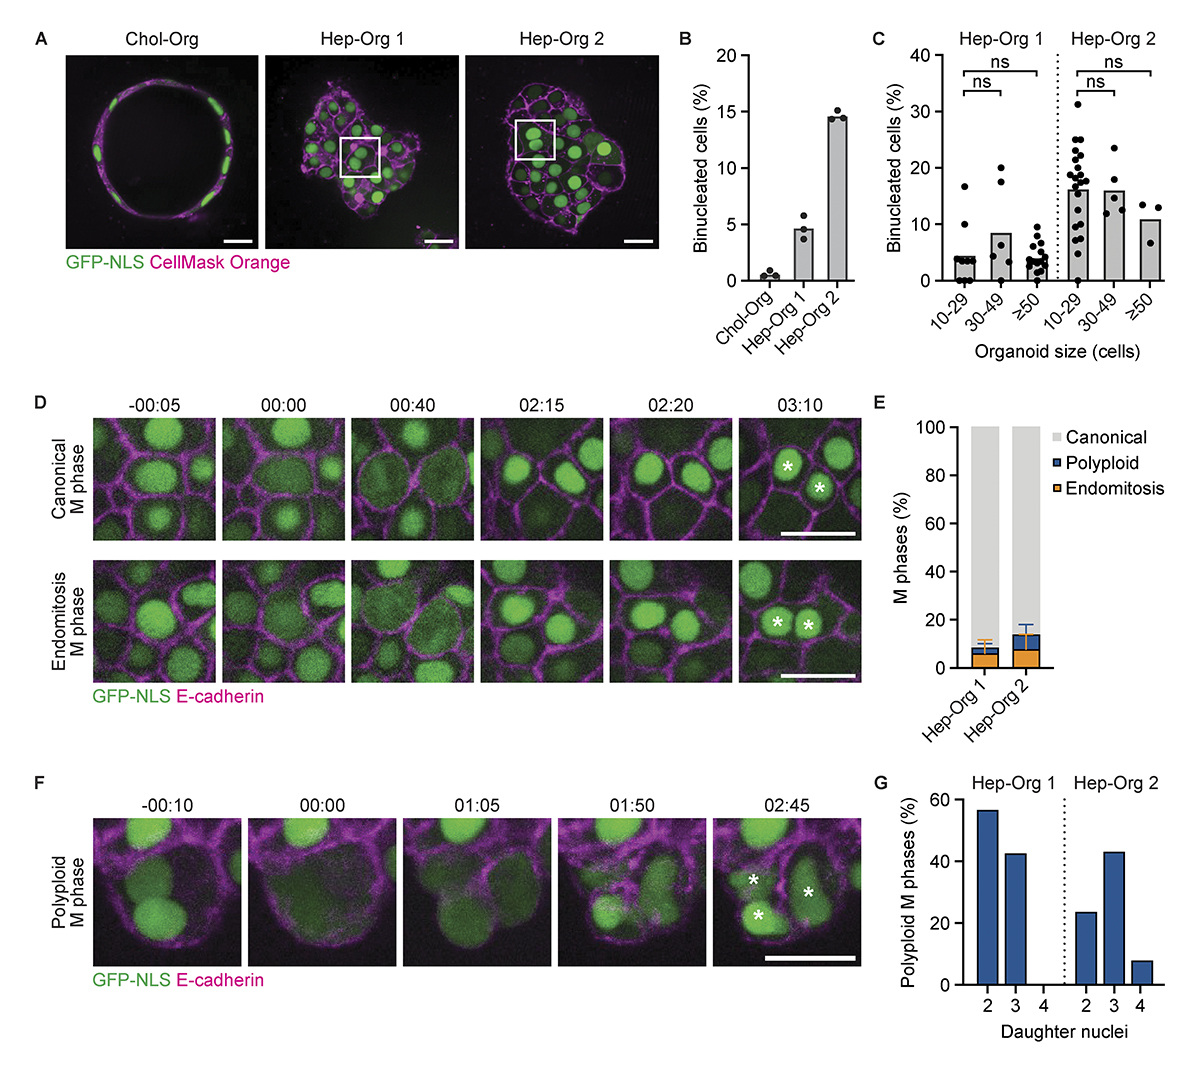 Binucleated human hepatocytes arise through late cytokinetic regression during endomitosis M phase - @gdarmasaputra @cindygeerlings @galli_matilde et al @_Hubrecht use fetal-derived hepatocyte organoids to investigate the regulation of endomitosis in vitro hubs.la/Q02wPPkc0